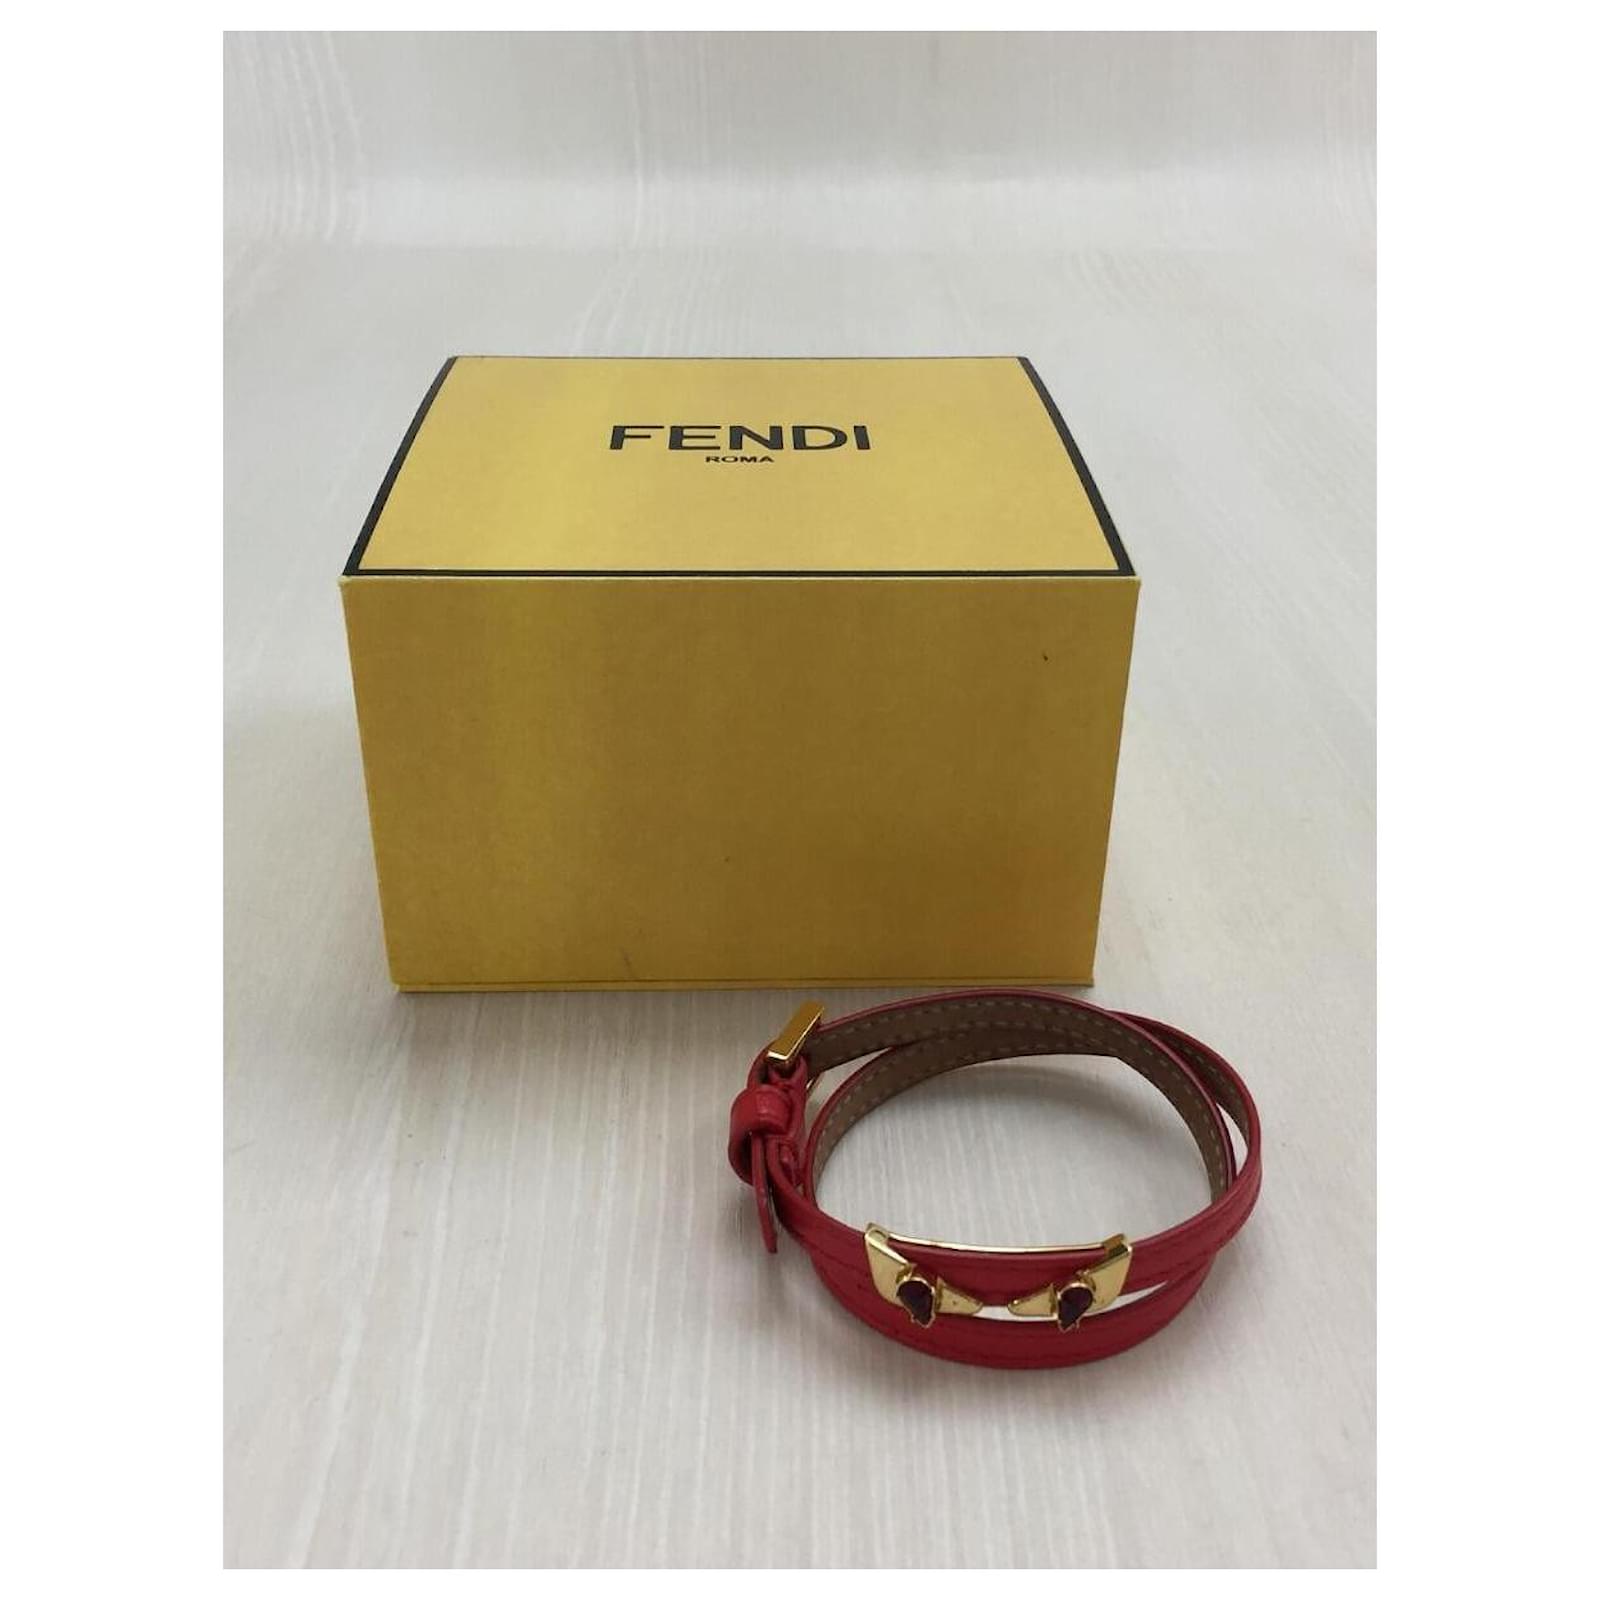 Buy Online Fendi-Rainbow Studded Bracelet Cuff-8AG625 with Attractive  Design in Singapore